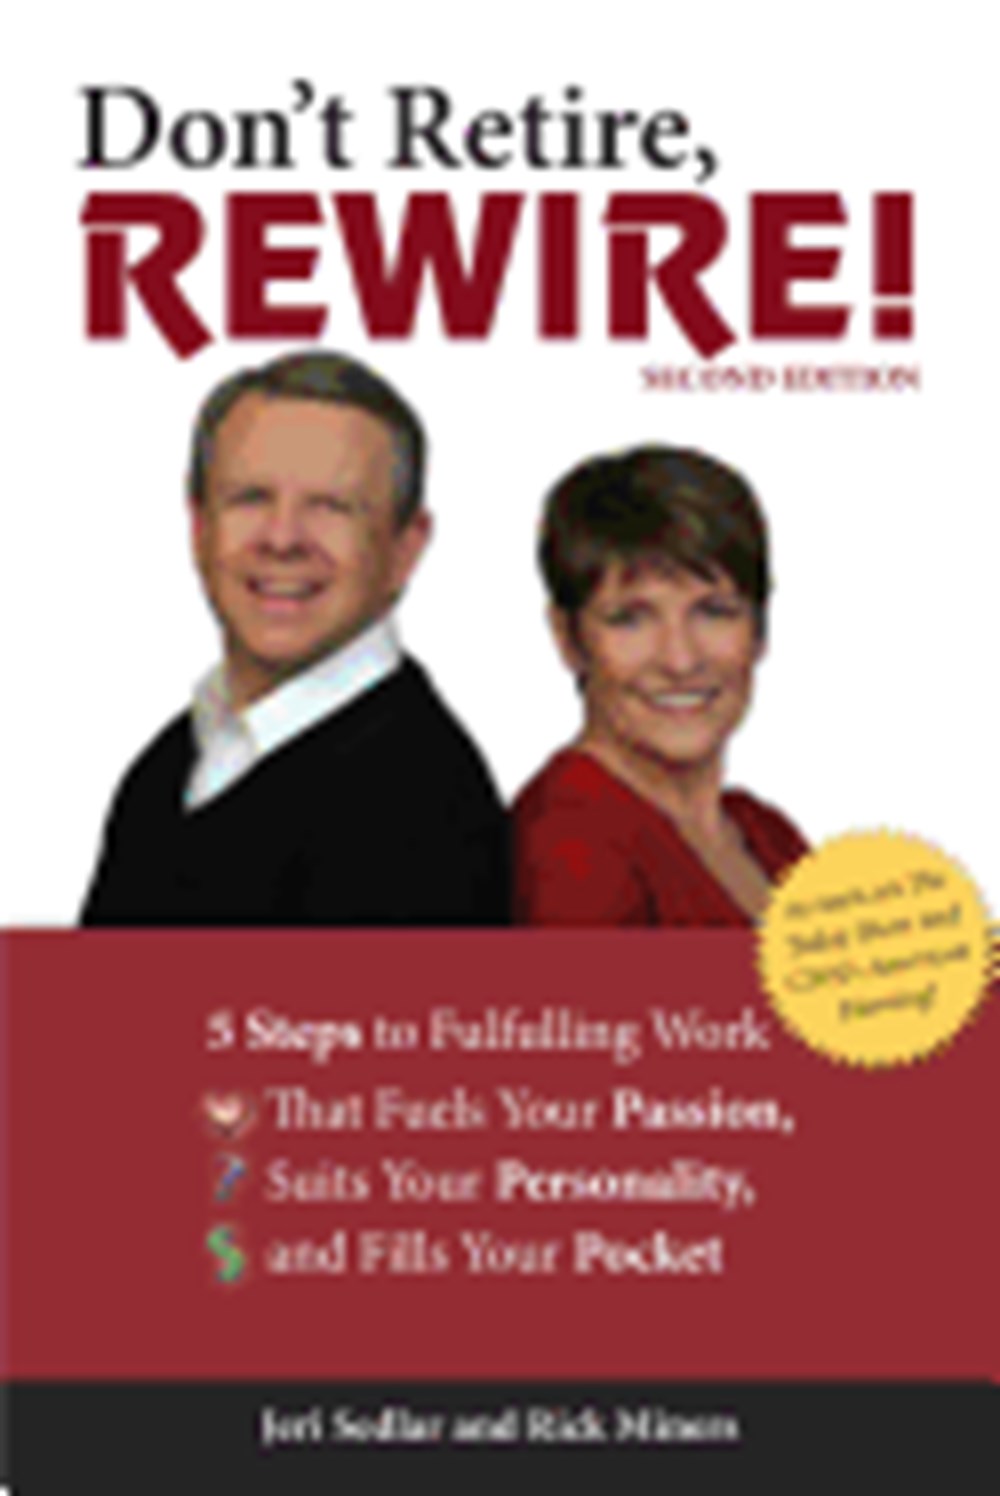 Don't Retire, Rewire!: 5 Steps to Fulfilling Work That Fuels Your Passion, Suits Your Personality, a